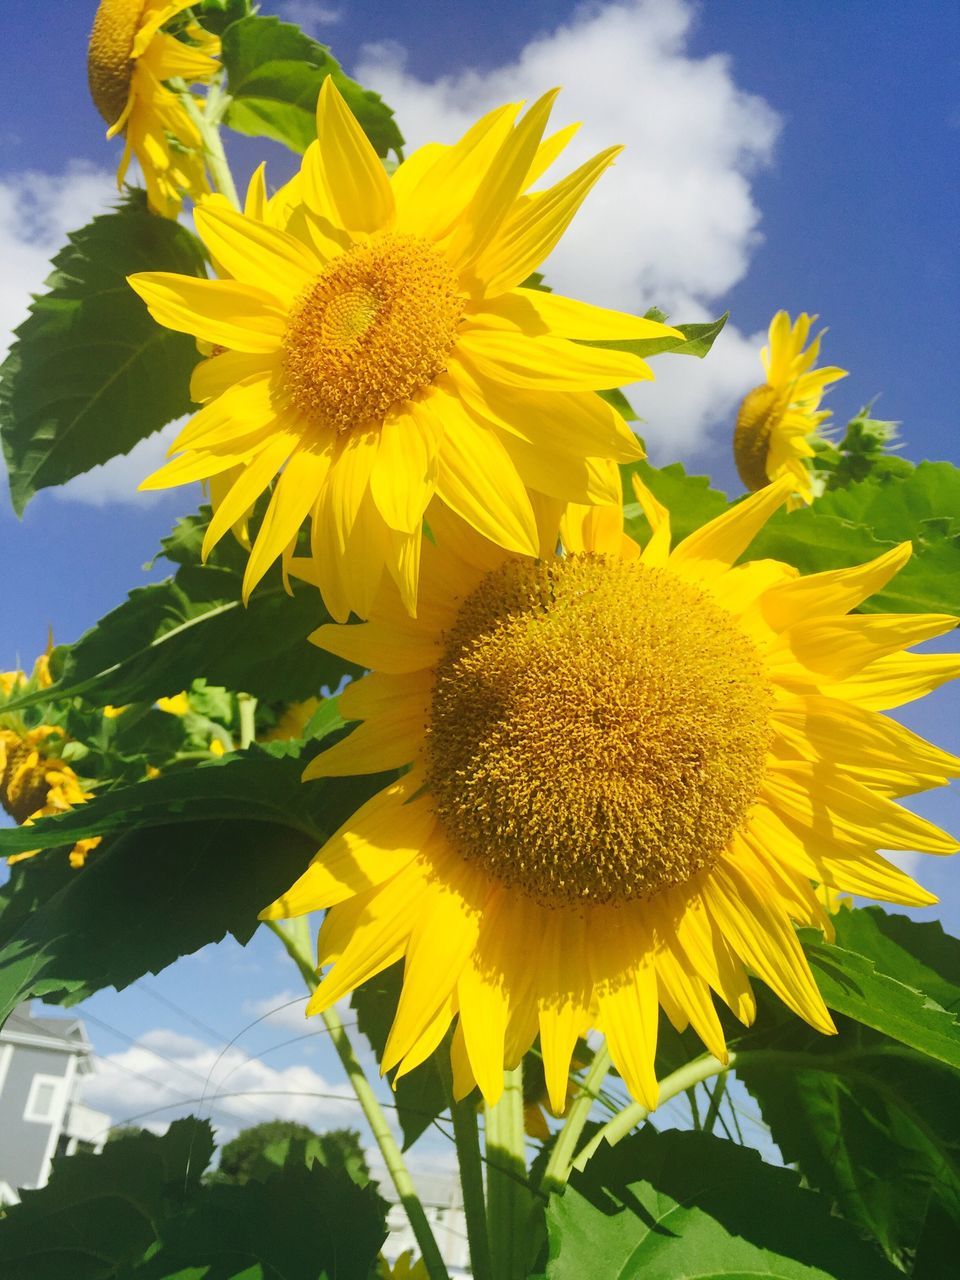 flower, yellow, freshness, sunflower, fragility, petal, growth, flower head, beauty in nature, sky, blooming, nature, plant, pollen, close-up, low angle view, leaf, in bloom, day, sunlight